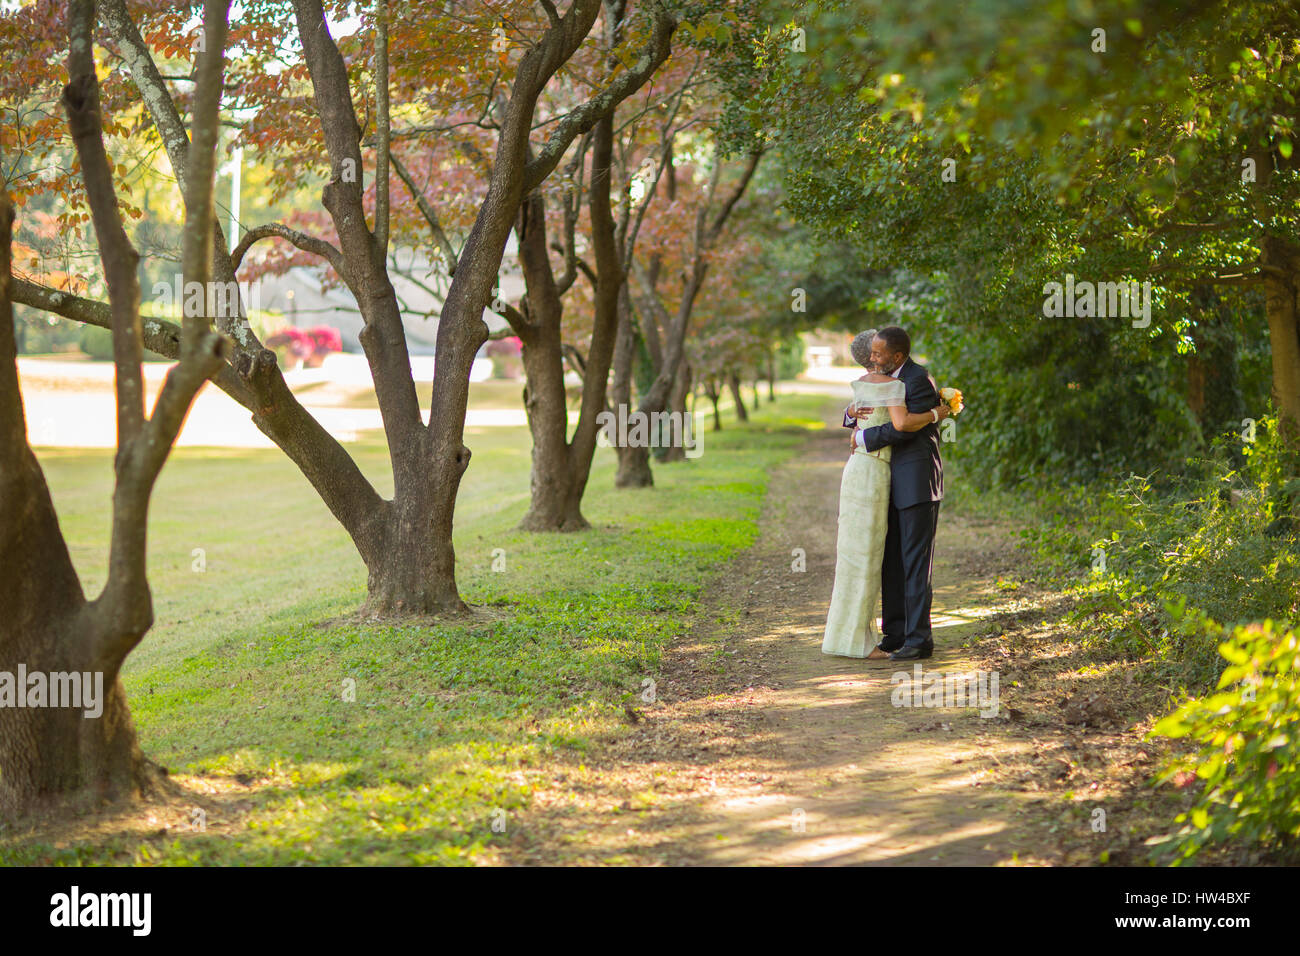 Black couple hugging on path in park Banque D'Images